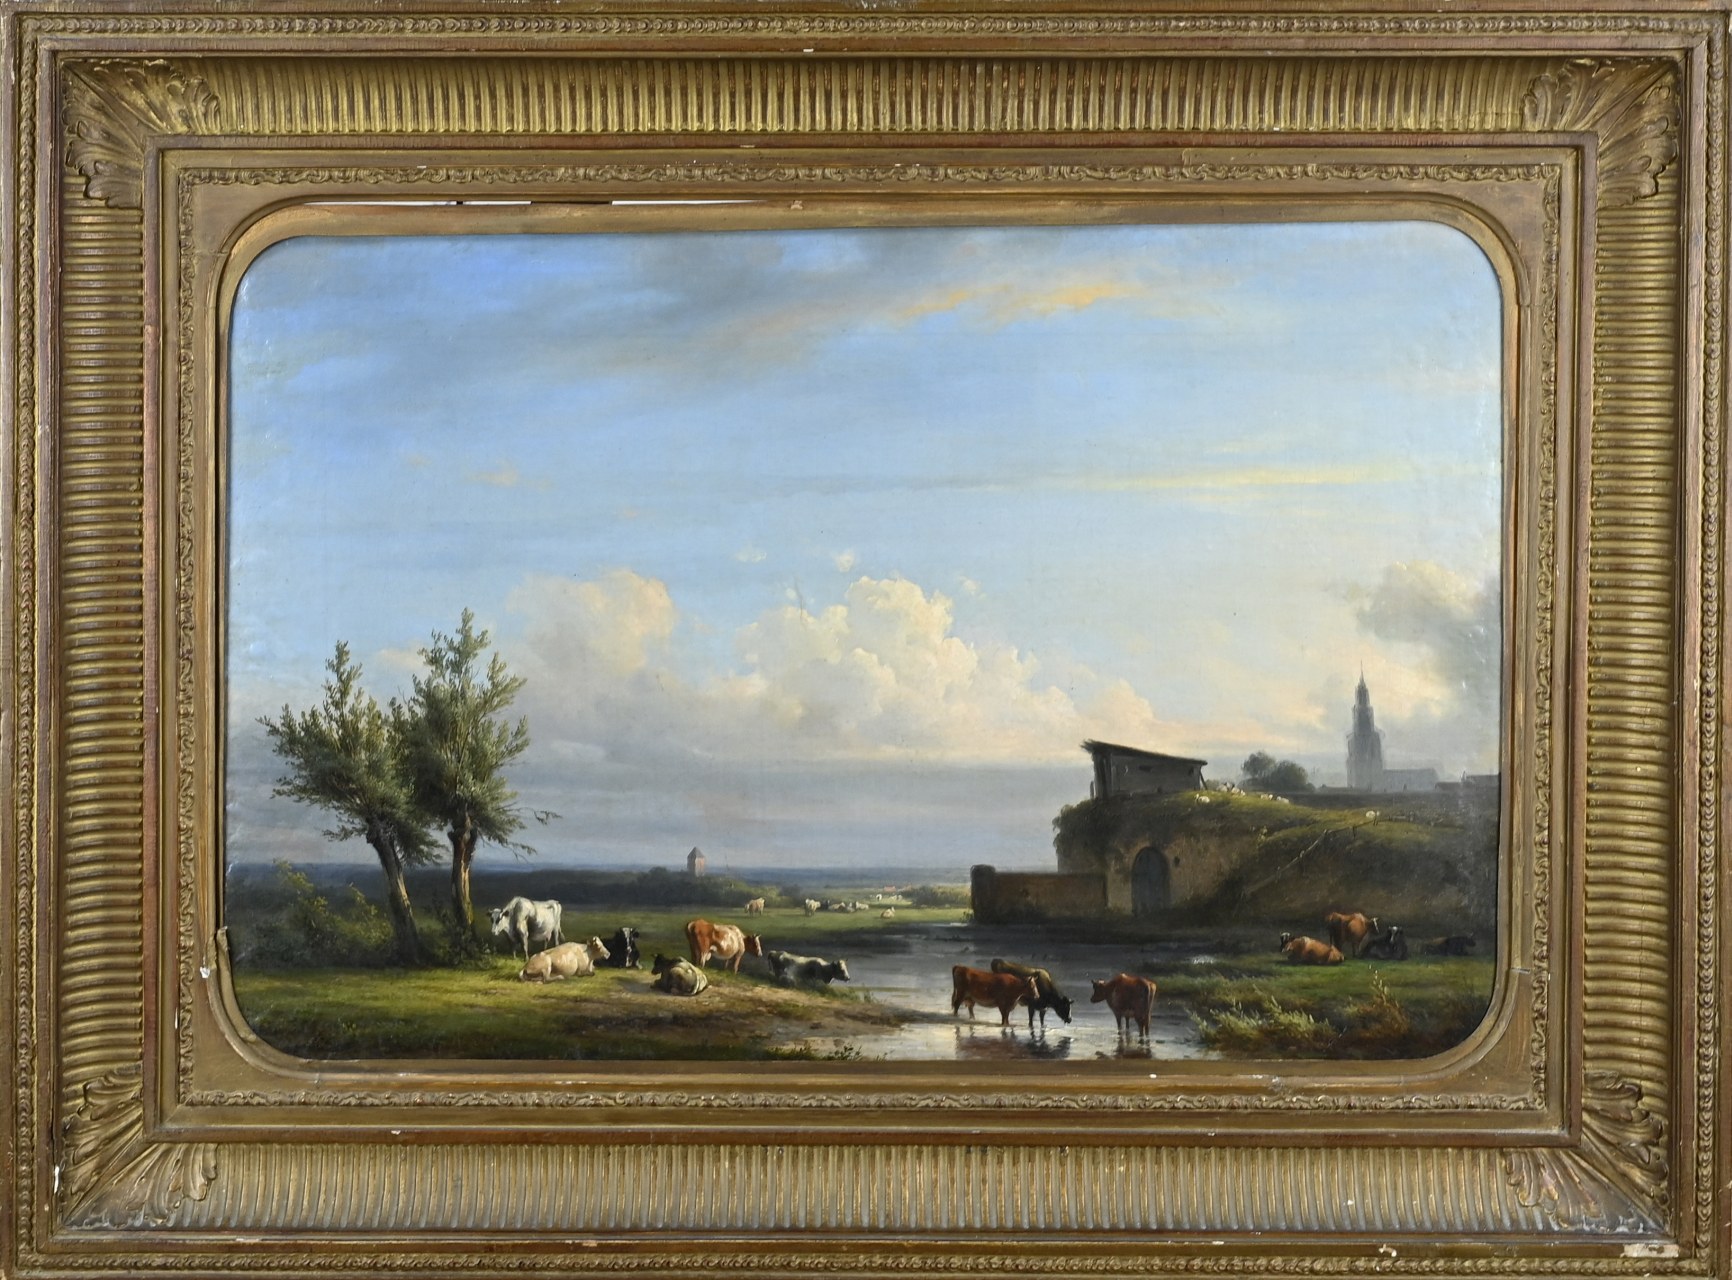 JJ Fels, Panoramic landscape with cattle